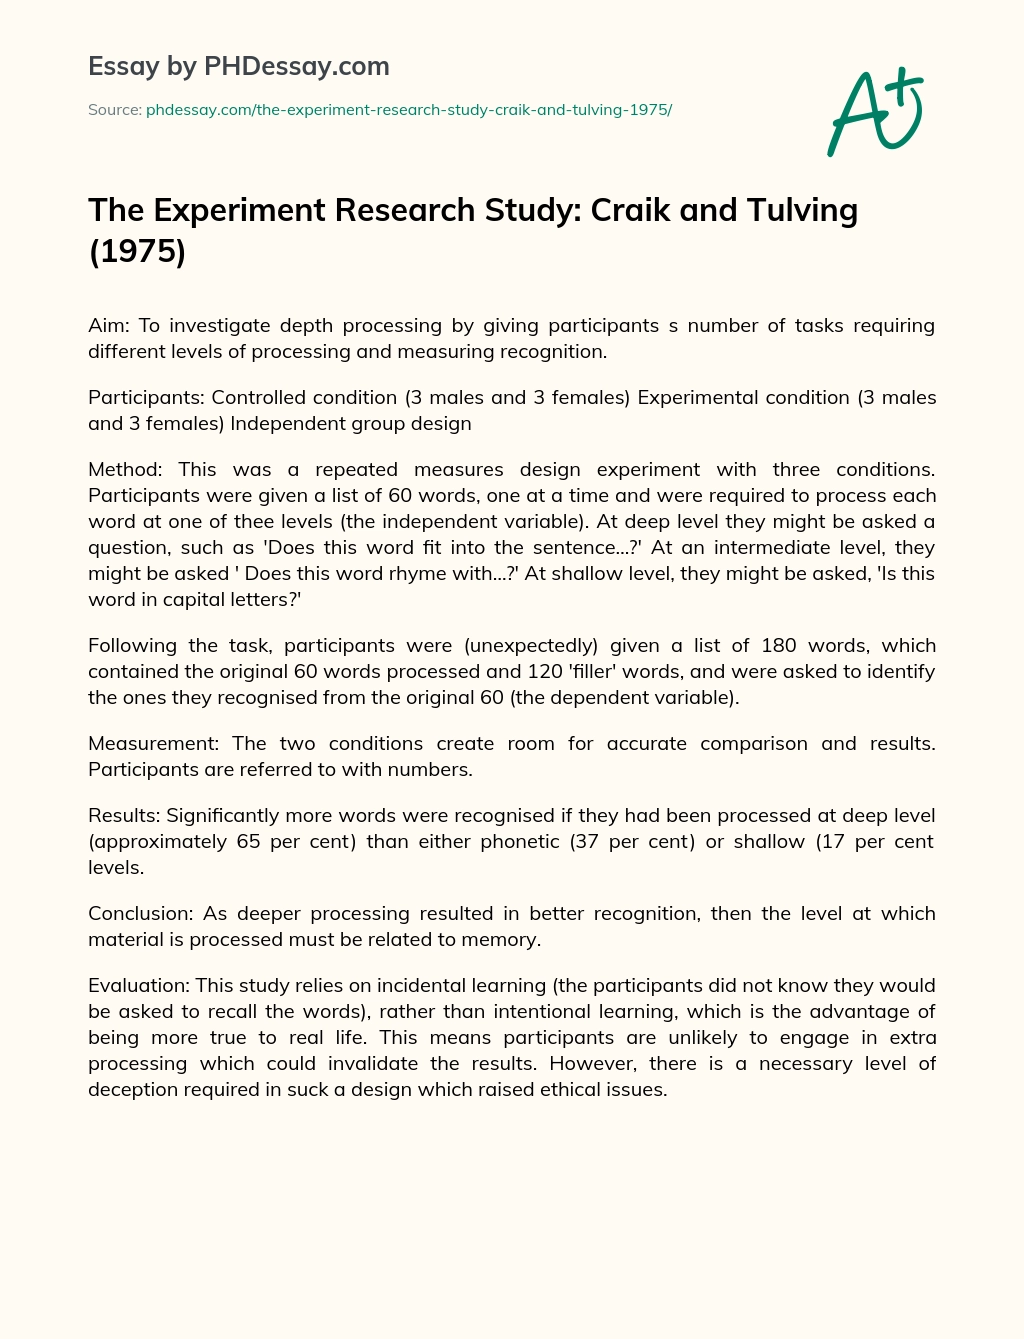 The Experiment Research Study: Craik and Tulving (1975) essay